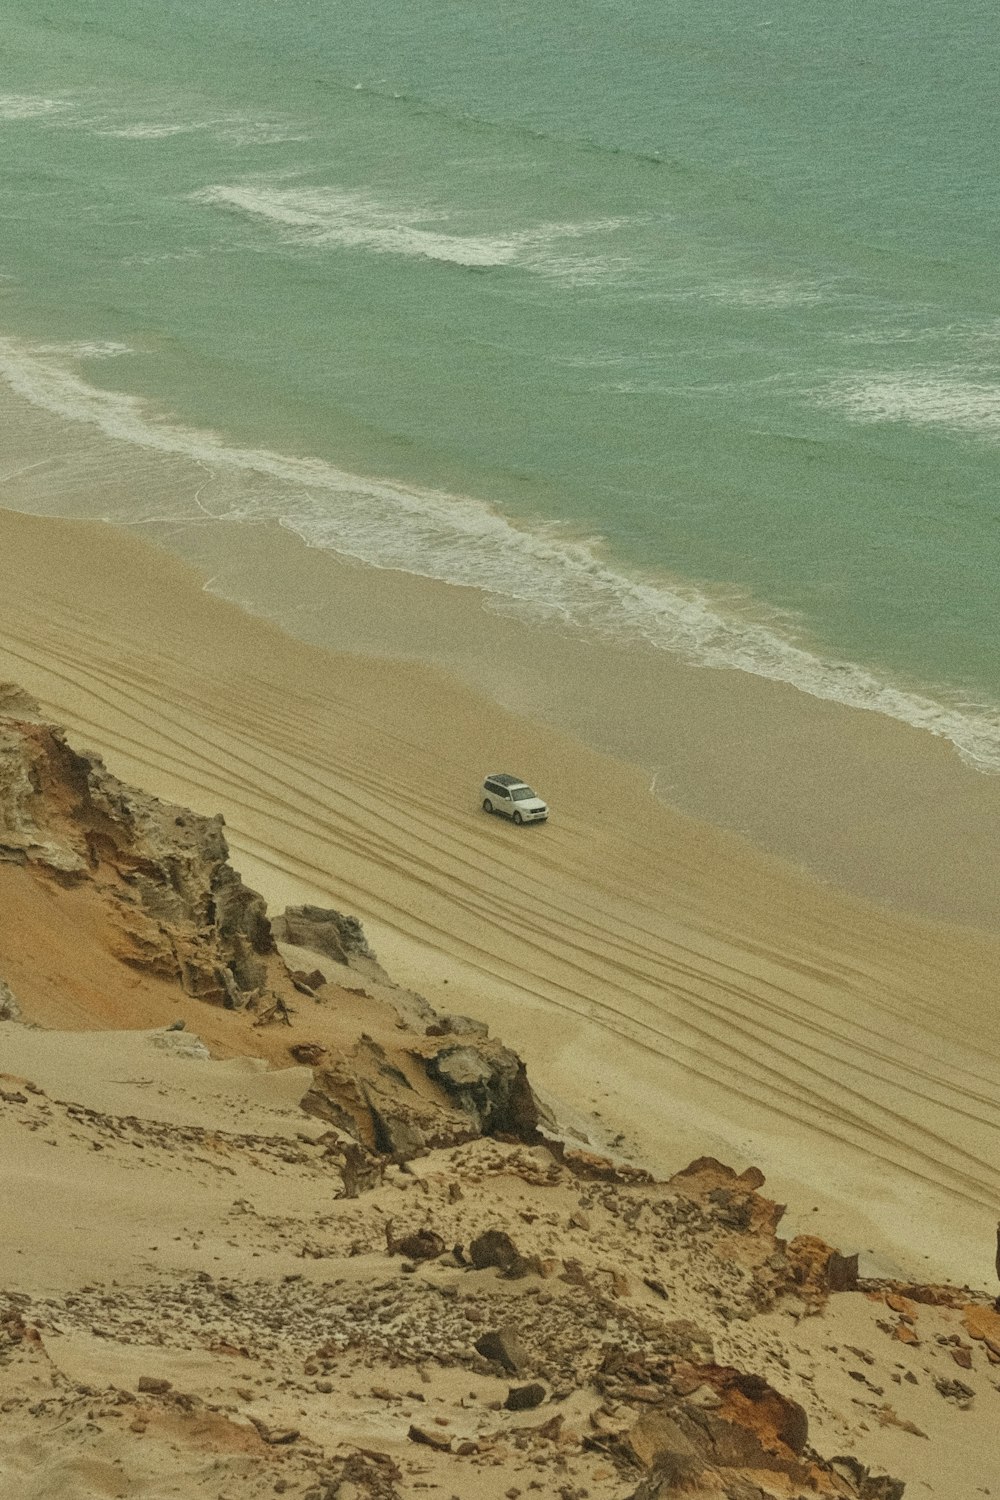 a car is parked on the beach near the water